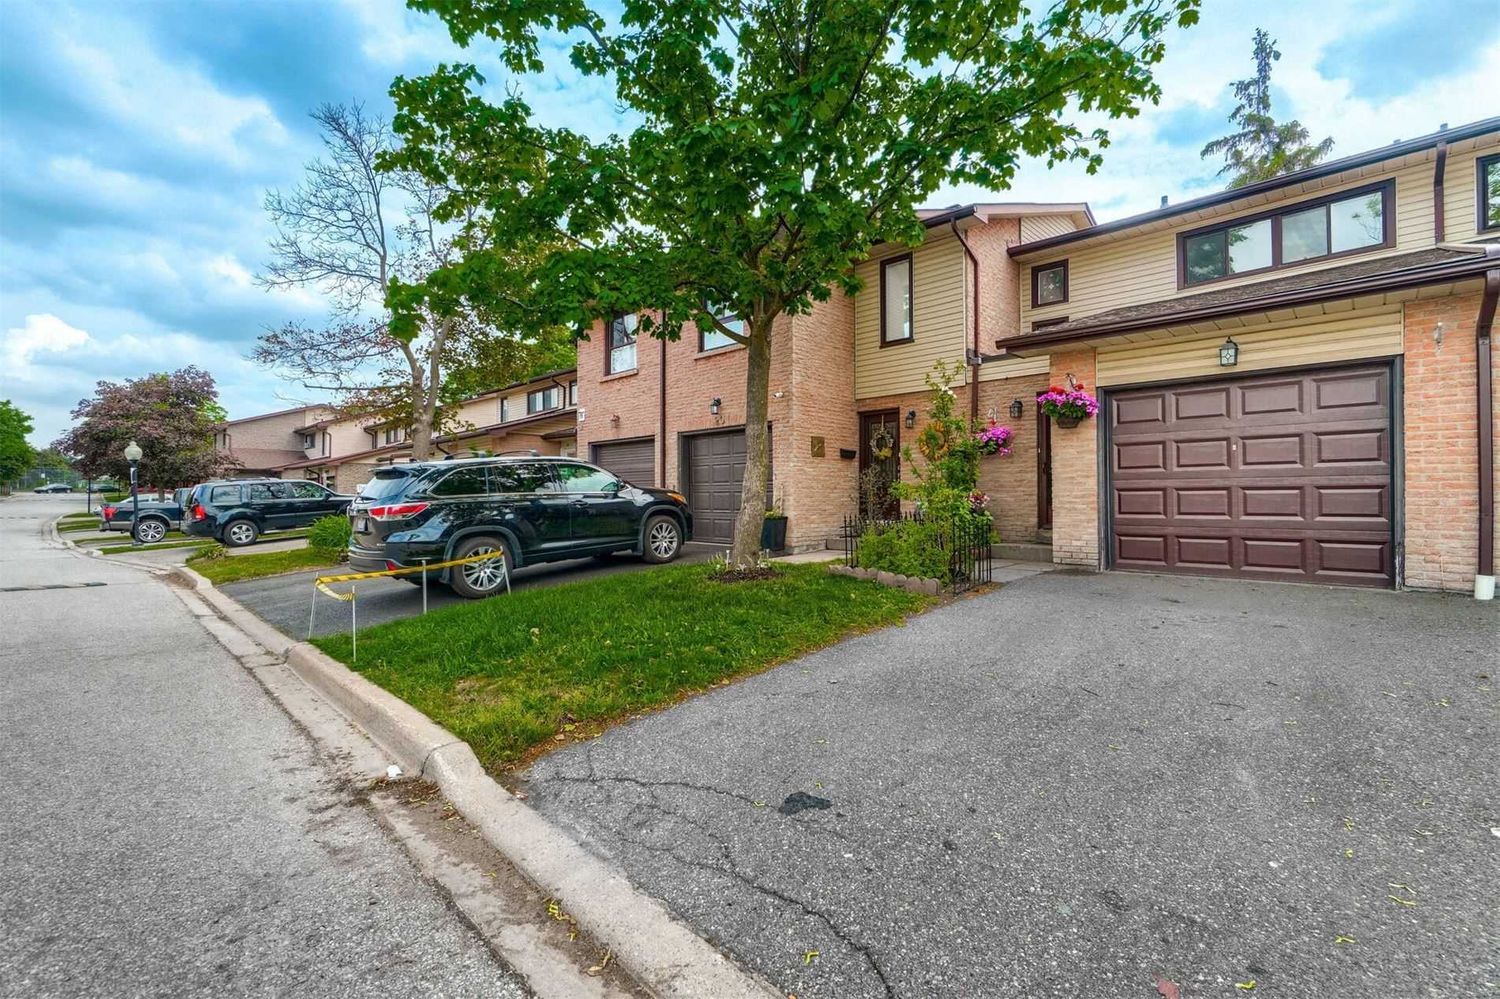 2-51 Collins Crescent. Collins Crescent Townhomes is located in  Brampton, Toronto - image #2 of 2